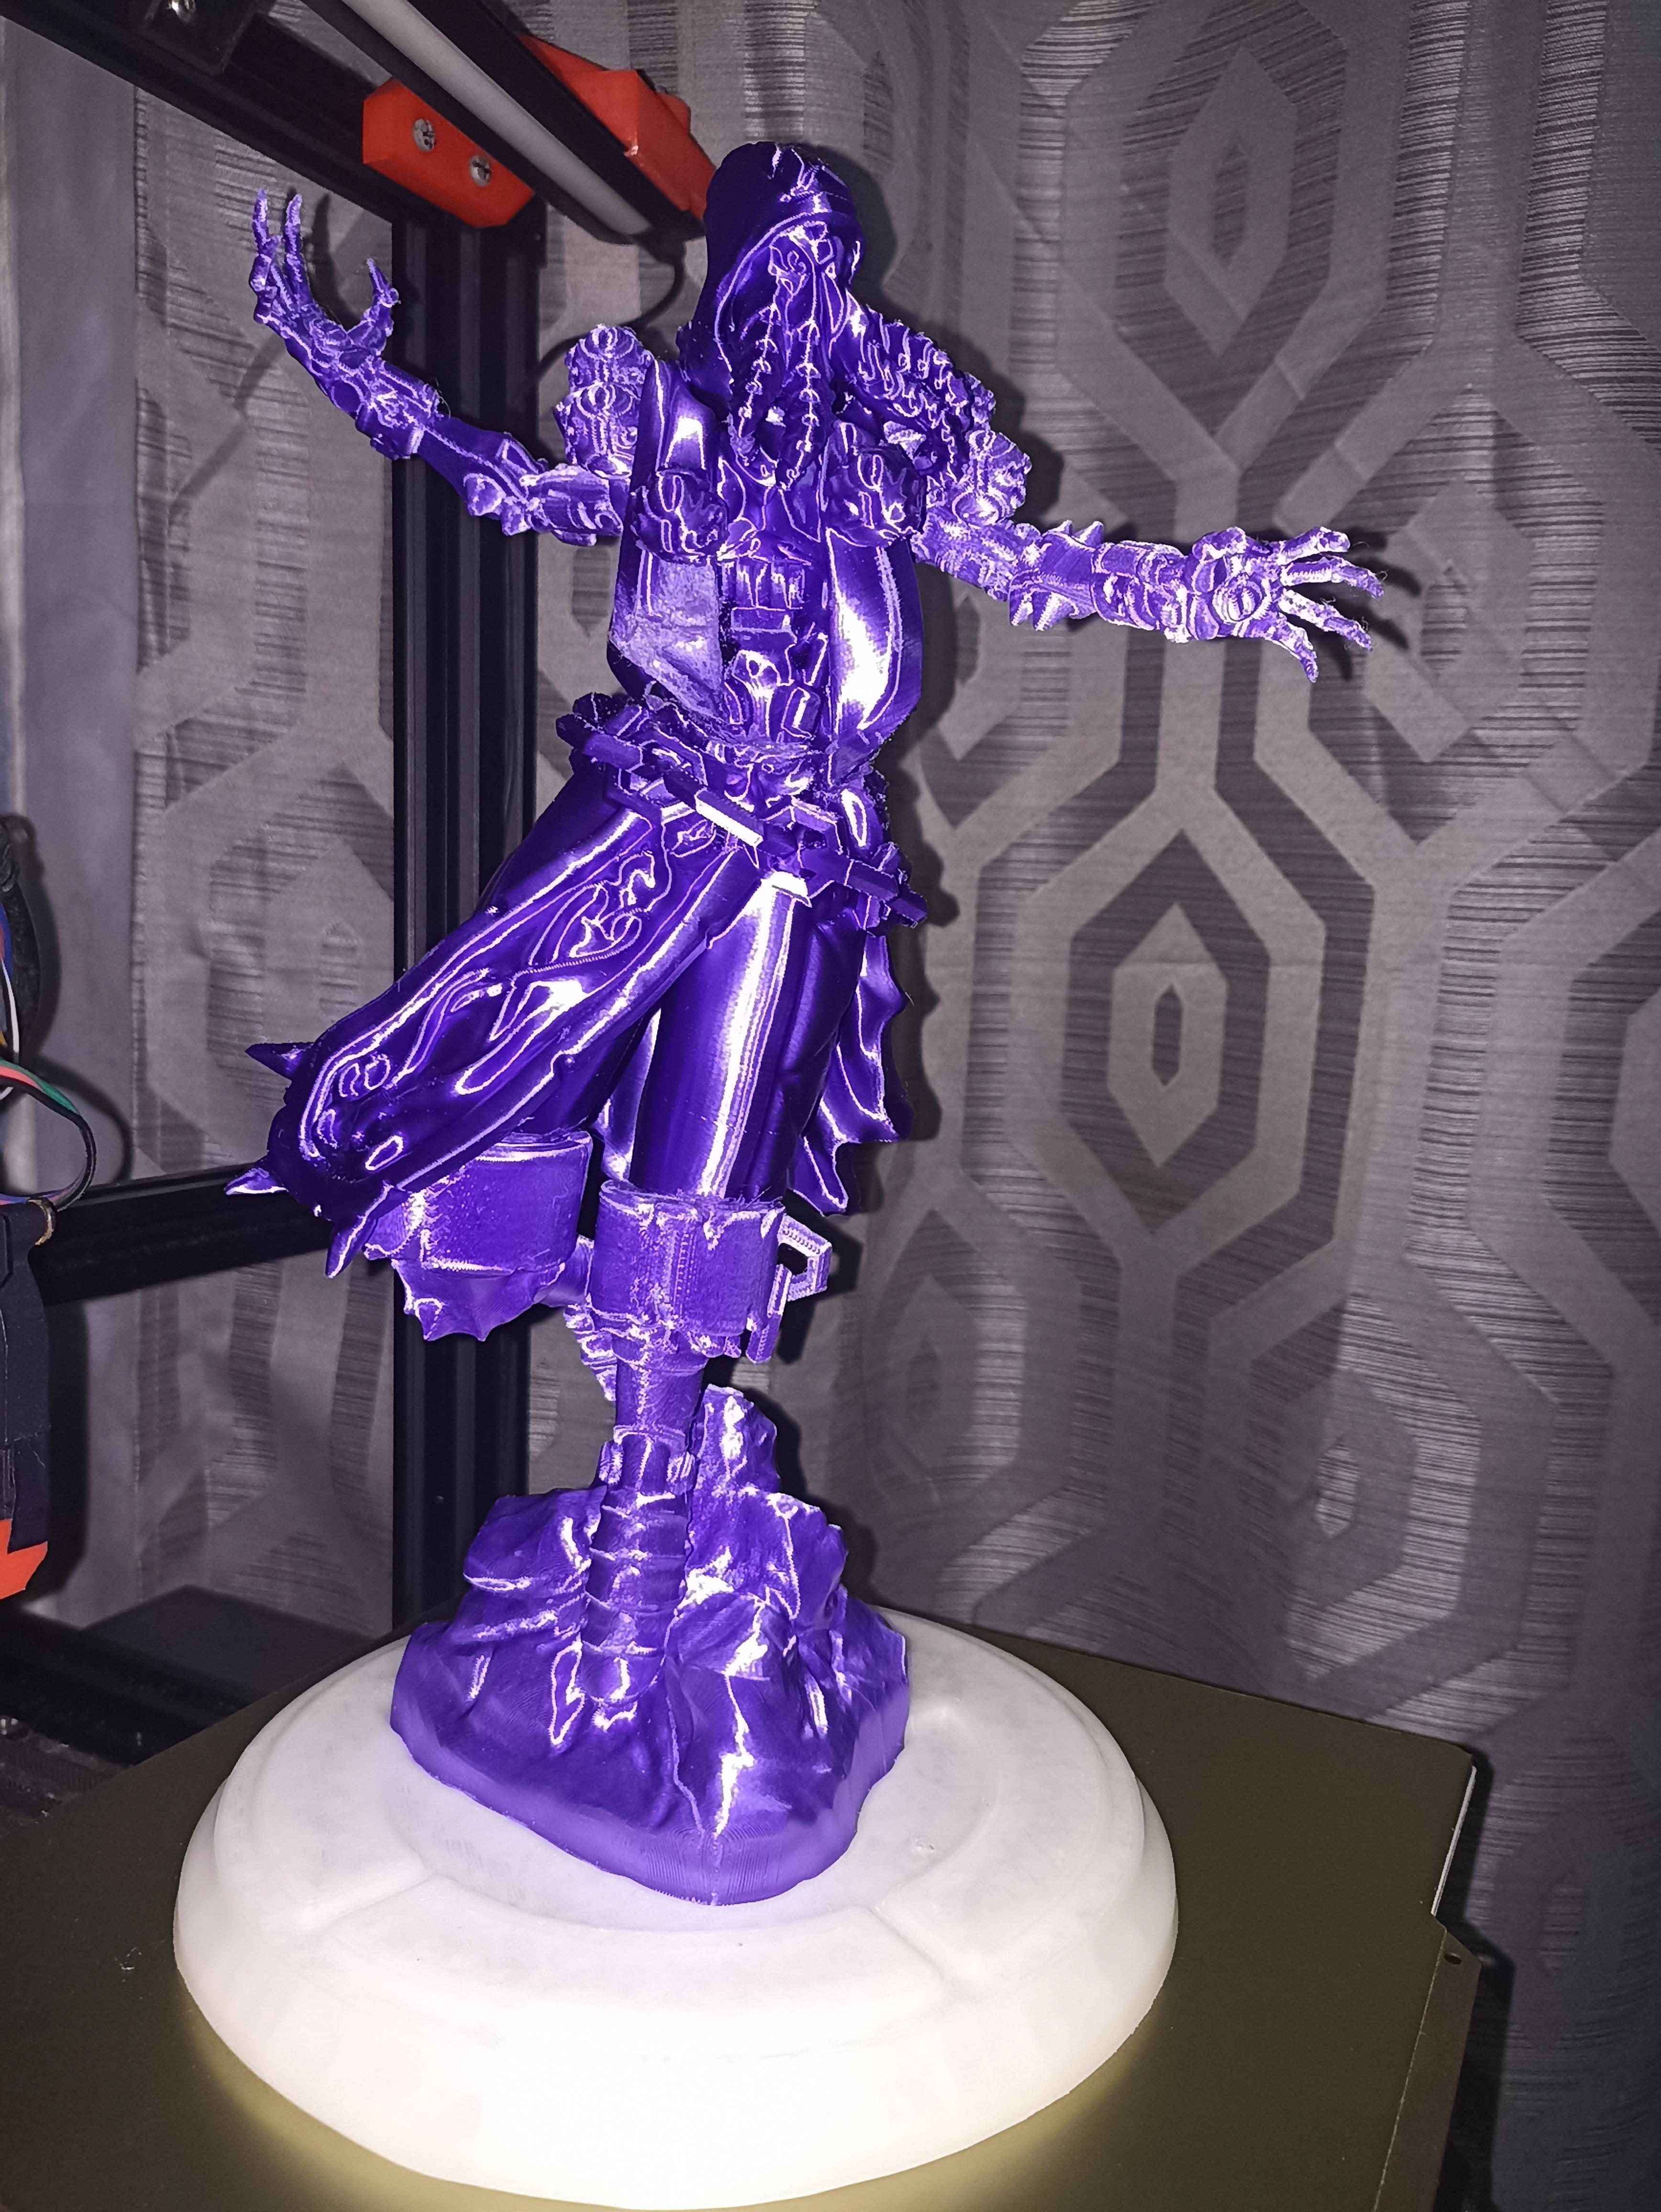 Cthulhu Zenyatta  - This thing looks amazing!!!!!

Just finished printing it
Base is Echien GITD(it faintly glows red)
Model is Polymaker purple silk

Might sand and paint it, not sure, it would be a first for me - 3d model